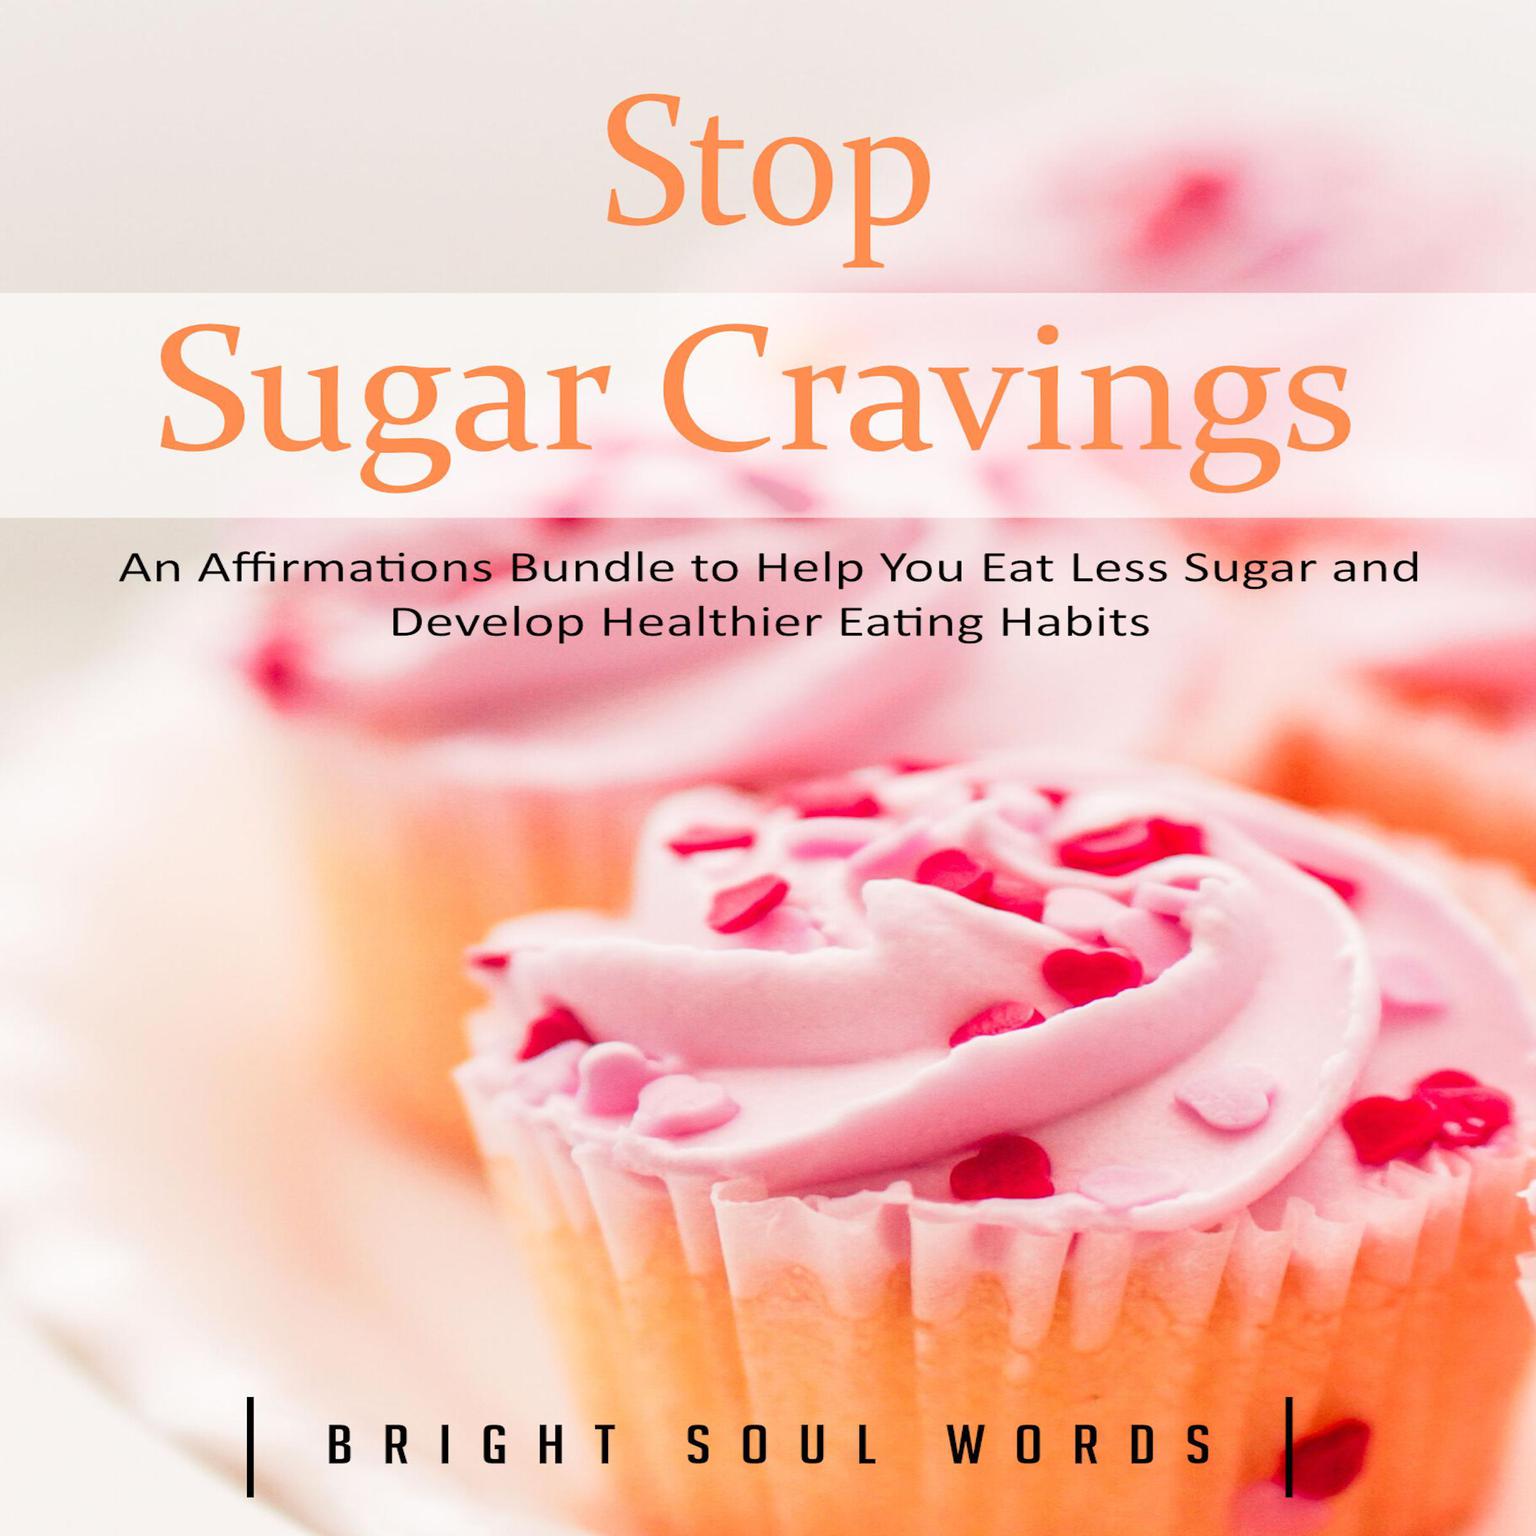 Stop Sugar Cravings: An Affirmations Bundle to Help You Eat Less Sugar and Develop Healthier Eating Habits Audiobook, by Bright Soul Words